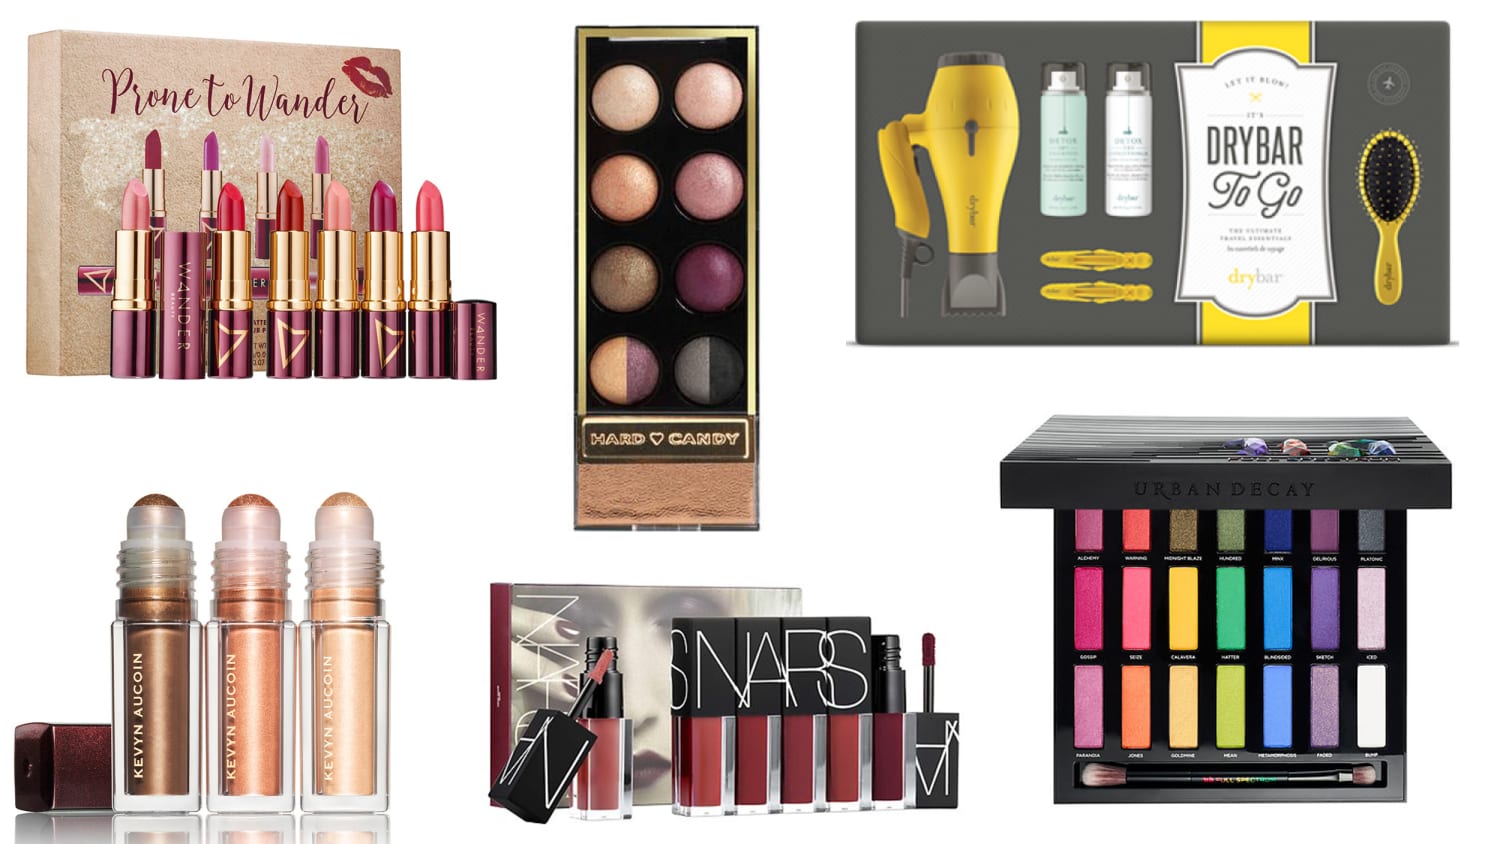 Gift ideas for her: Beauty kits, makeup